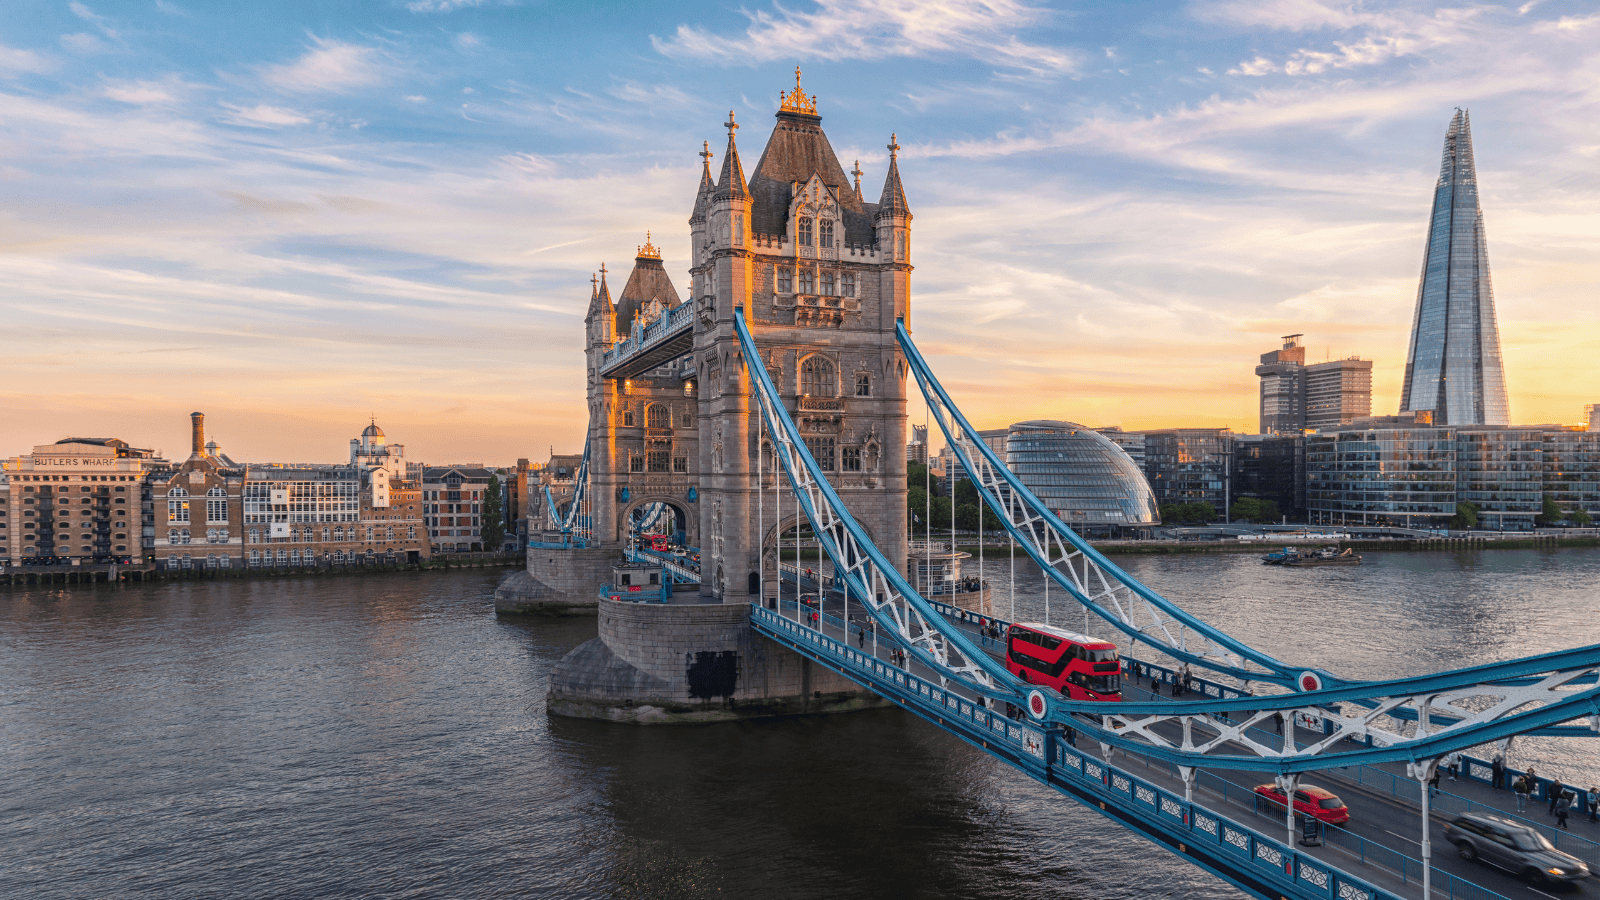 <p>Hop across the pond to spend March in the United Kingdom (U.K.). Famous areas like <a href="https://whatthefab.com/things-to-do-in-london.html" rel="follow">London</a>, England, and Edinburgh, Scotland, are significantly more affordable in spring. The weather is also typically pleasant, and you’ll avoid the surge of summer tourists. Book your trip to the U.K. in March for cheaper airfare and lodging options.</p>